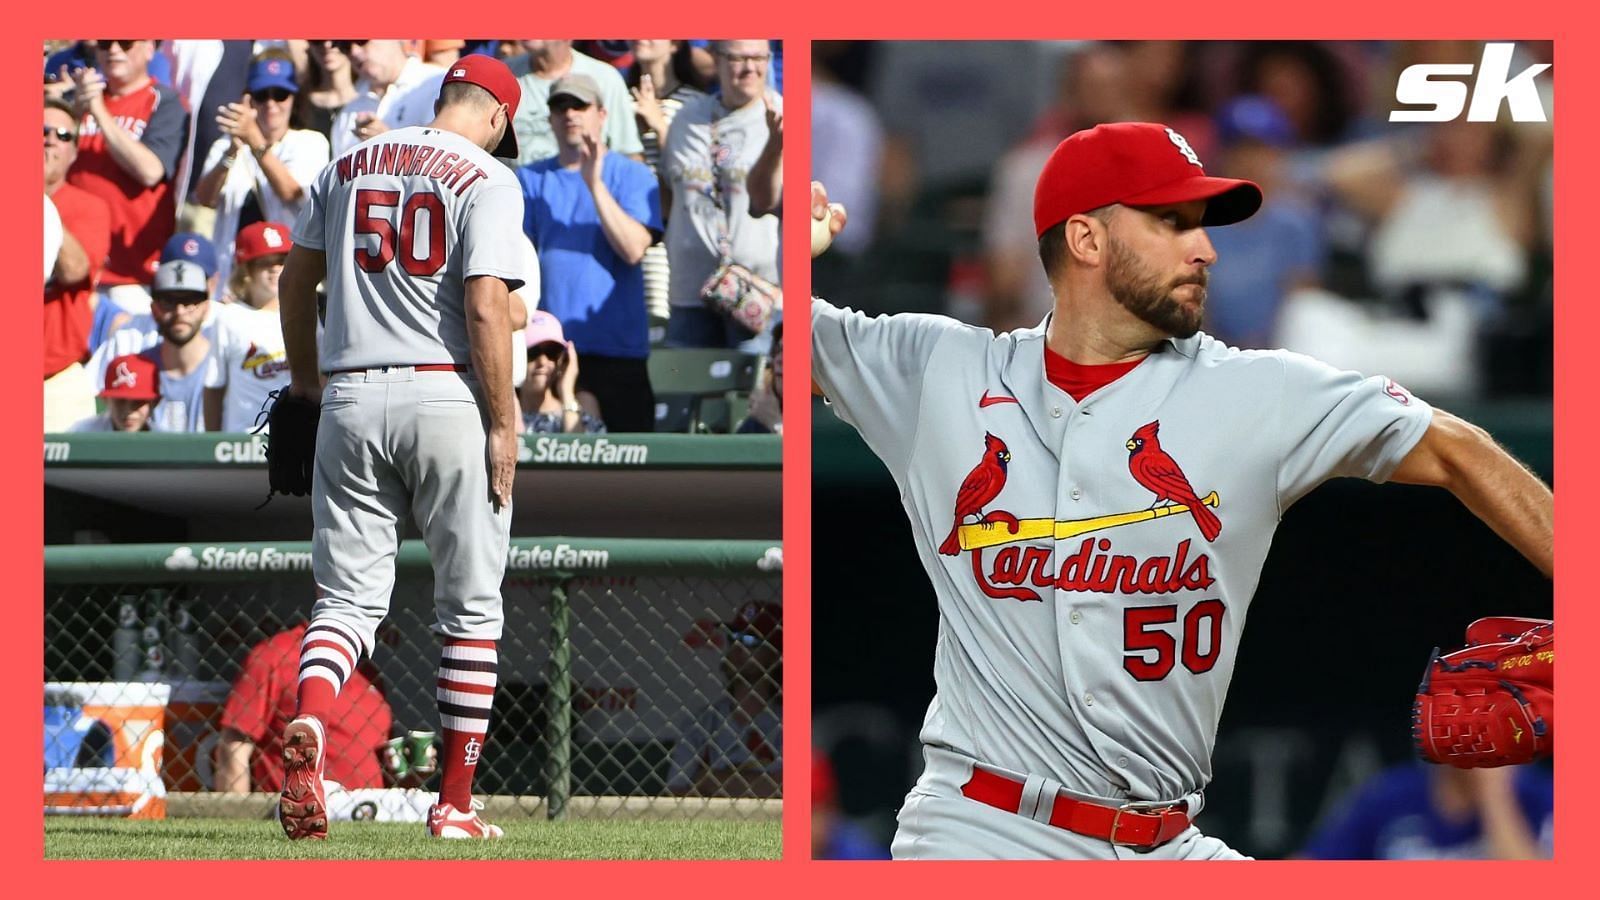 St. Louis Cardinals ace Adam Wainwright vows to return as he goes on injured list with sore shoulder